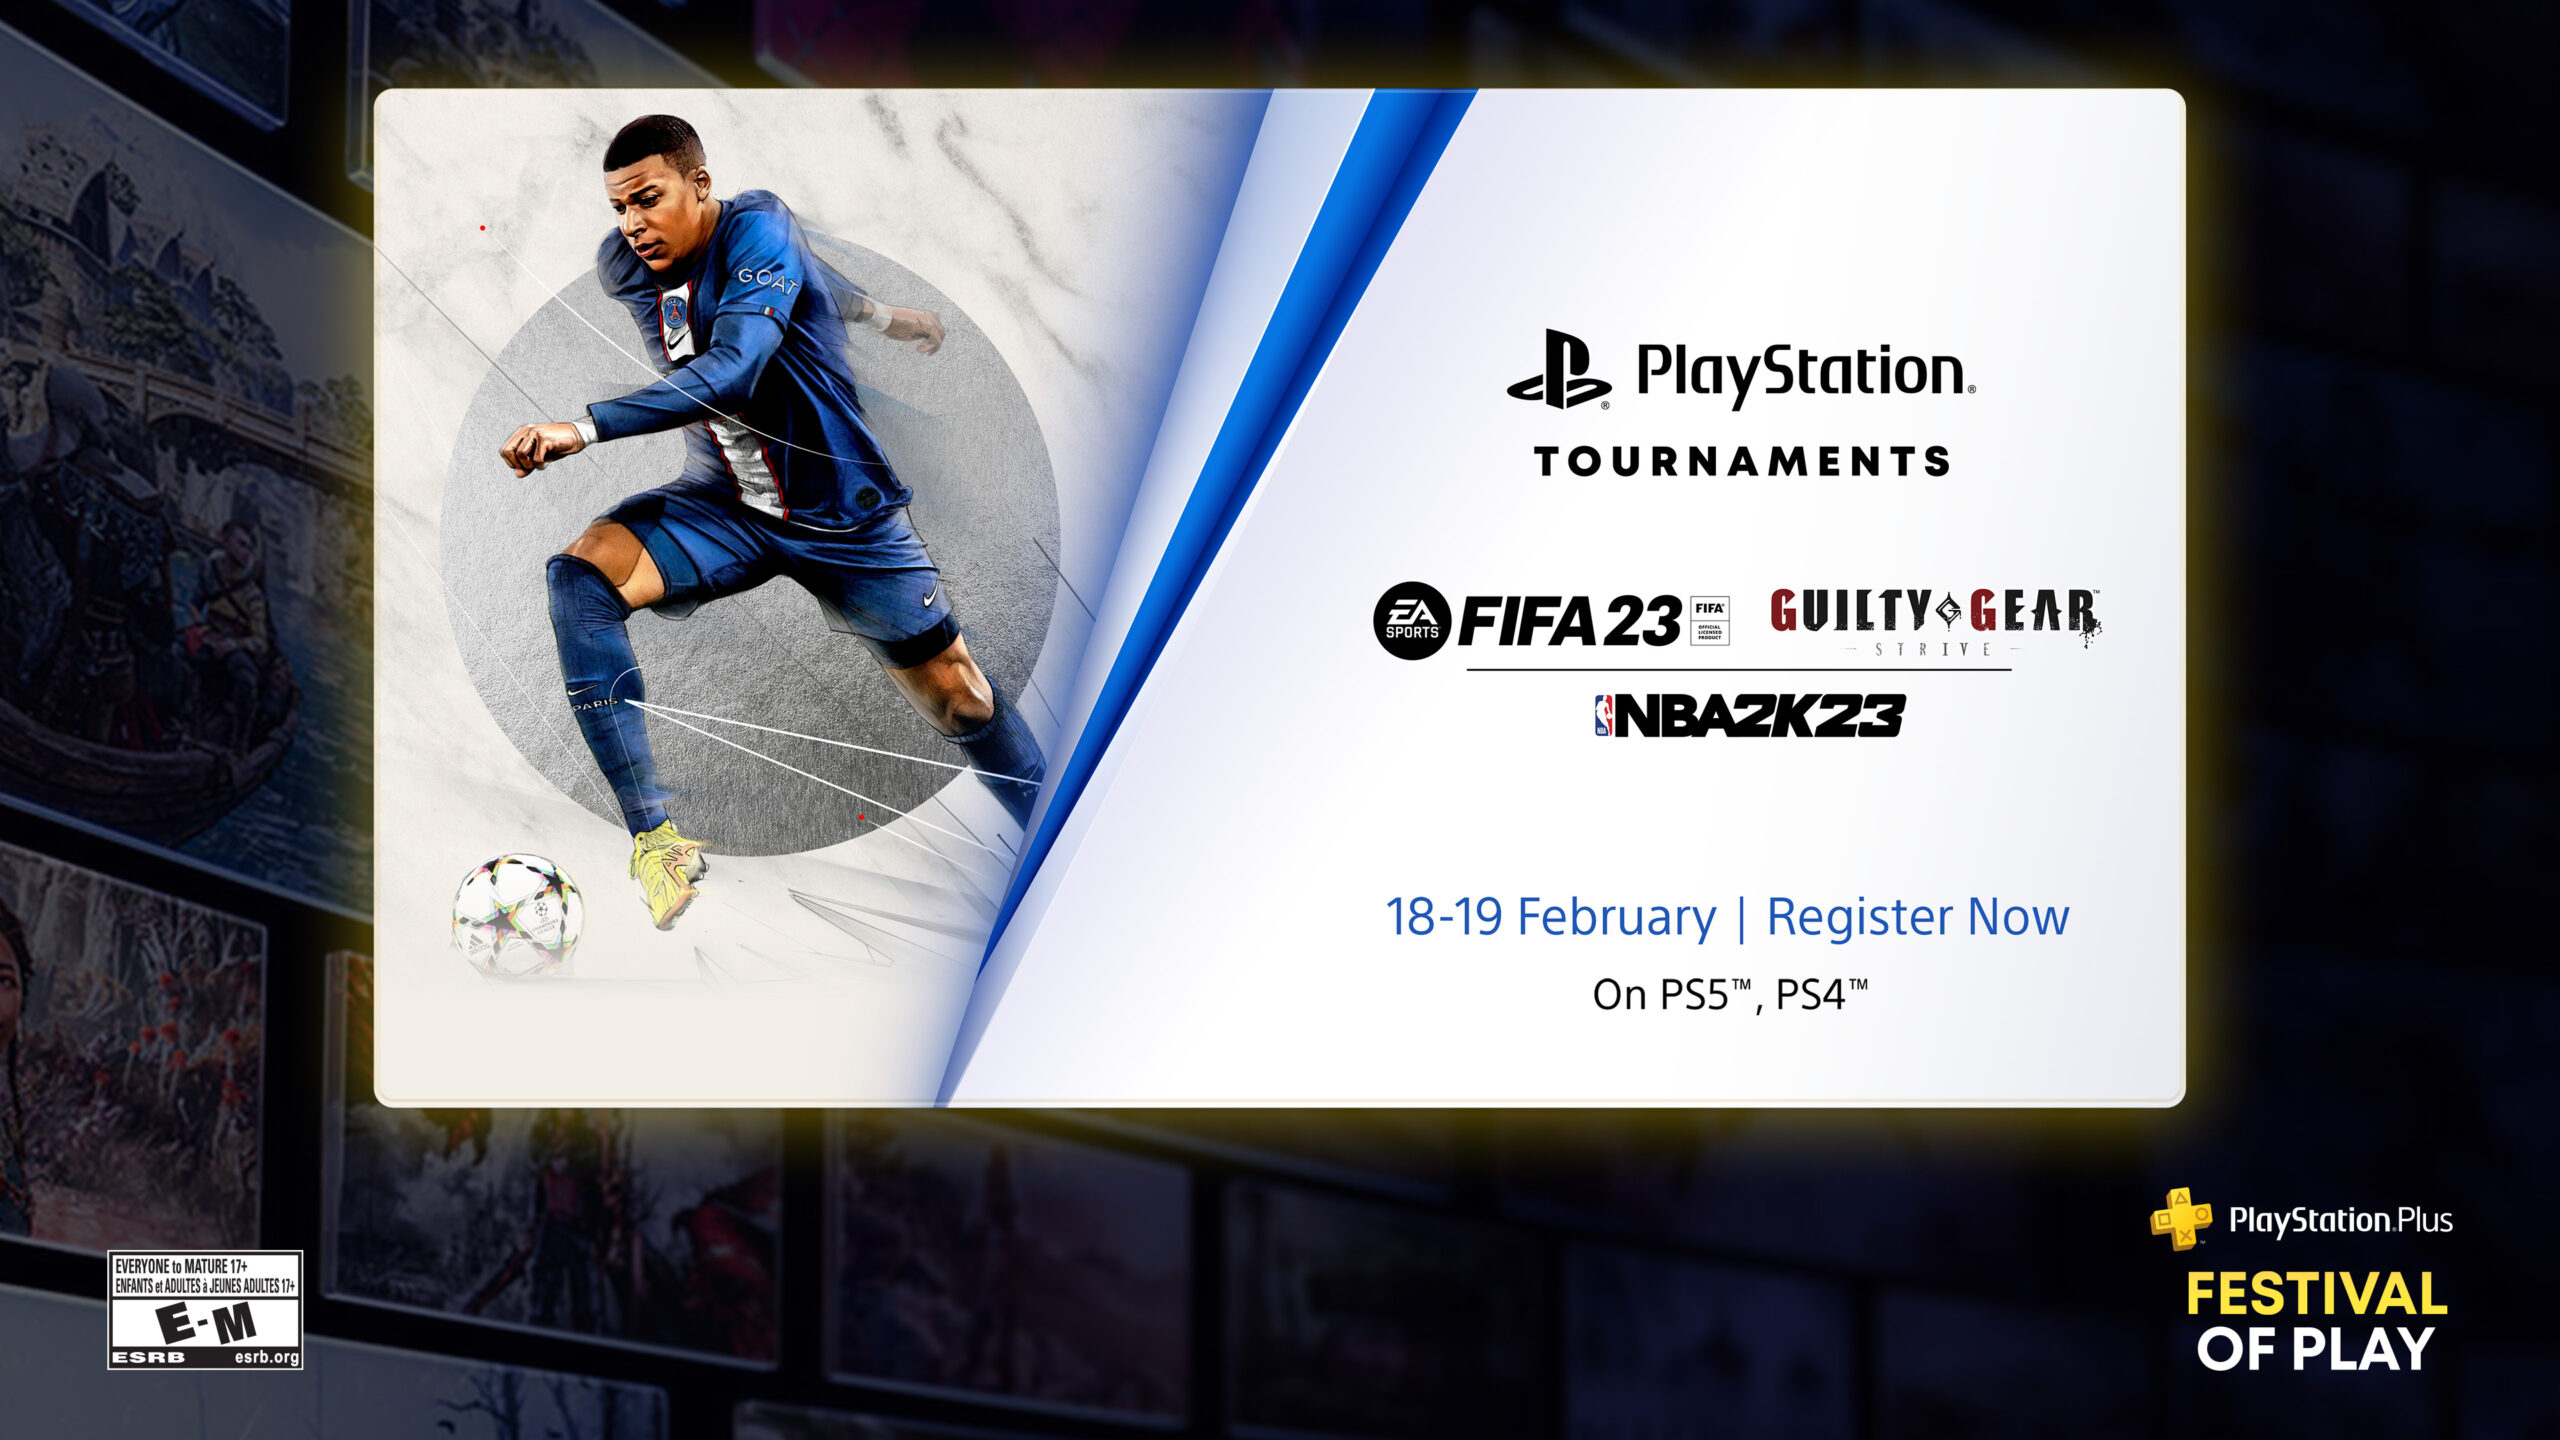 Join us for PlayStation Plus Festival of Play – 